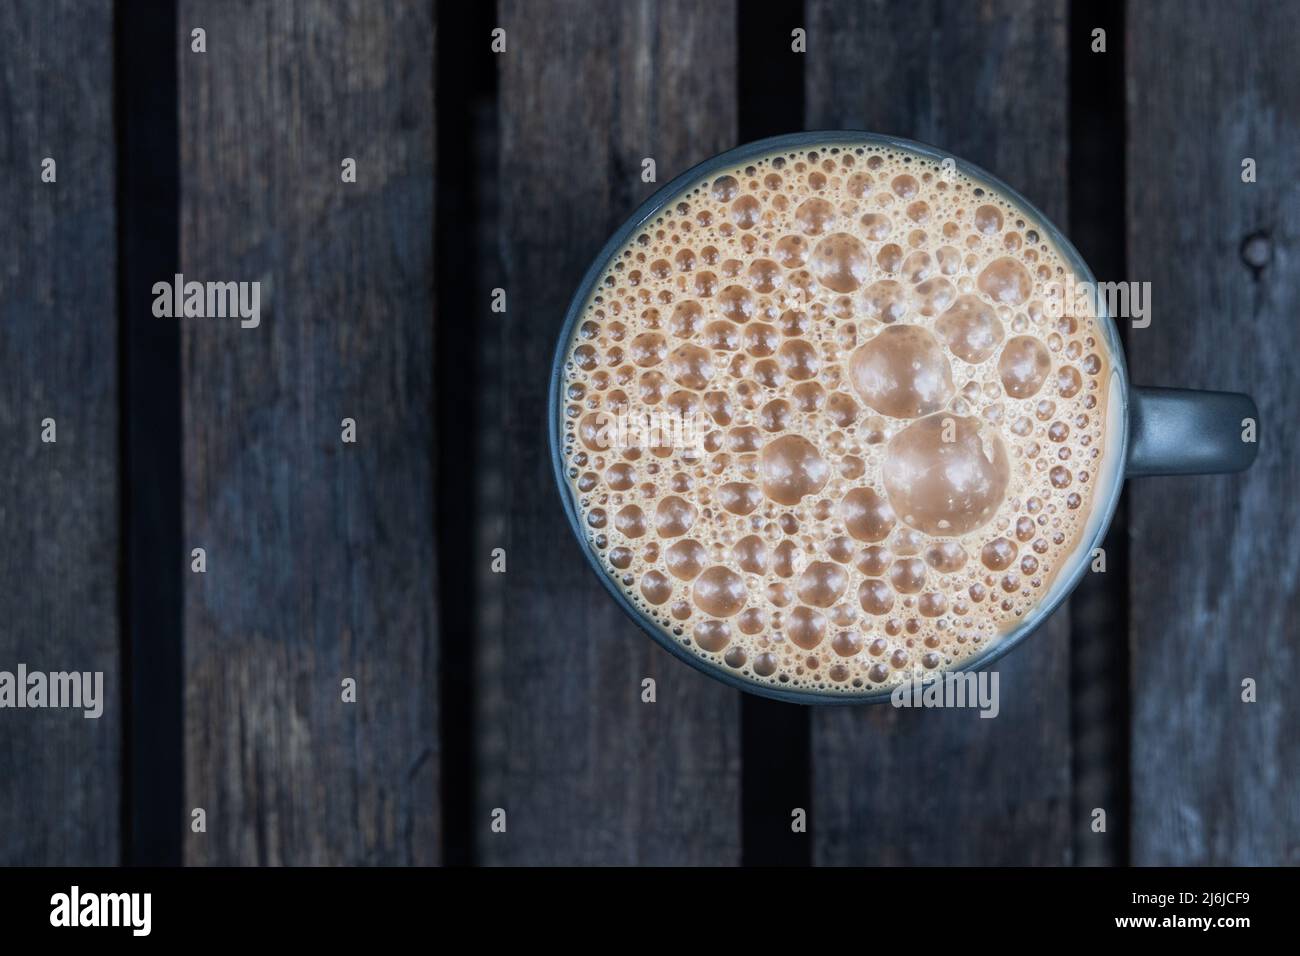 Ovverhead view of Teh Tarik. It is infused black tea with milk served in thick froth. Popular drinks in Malaysia Stock Photo